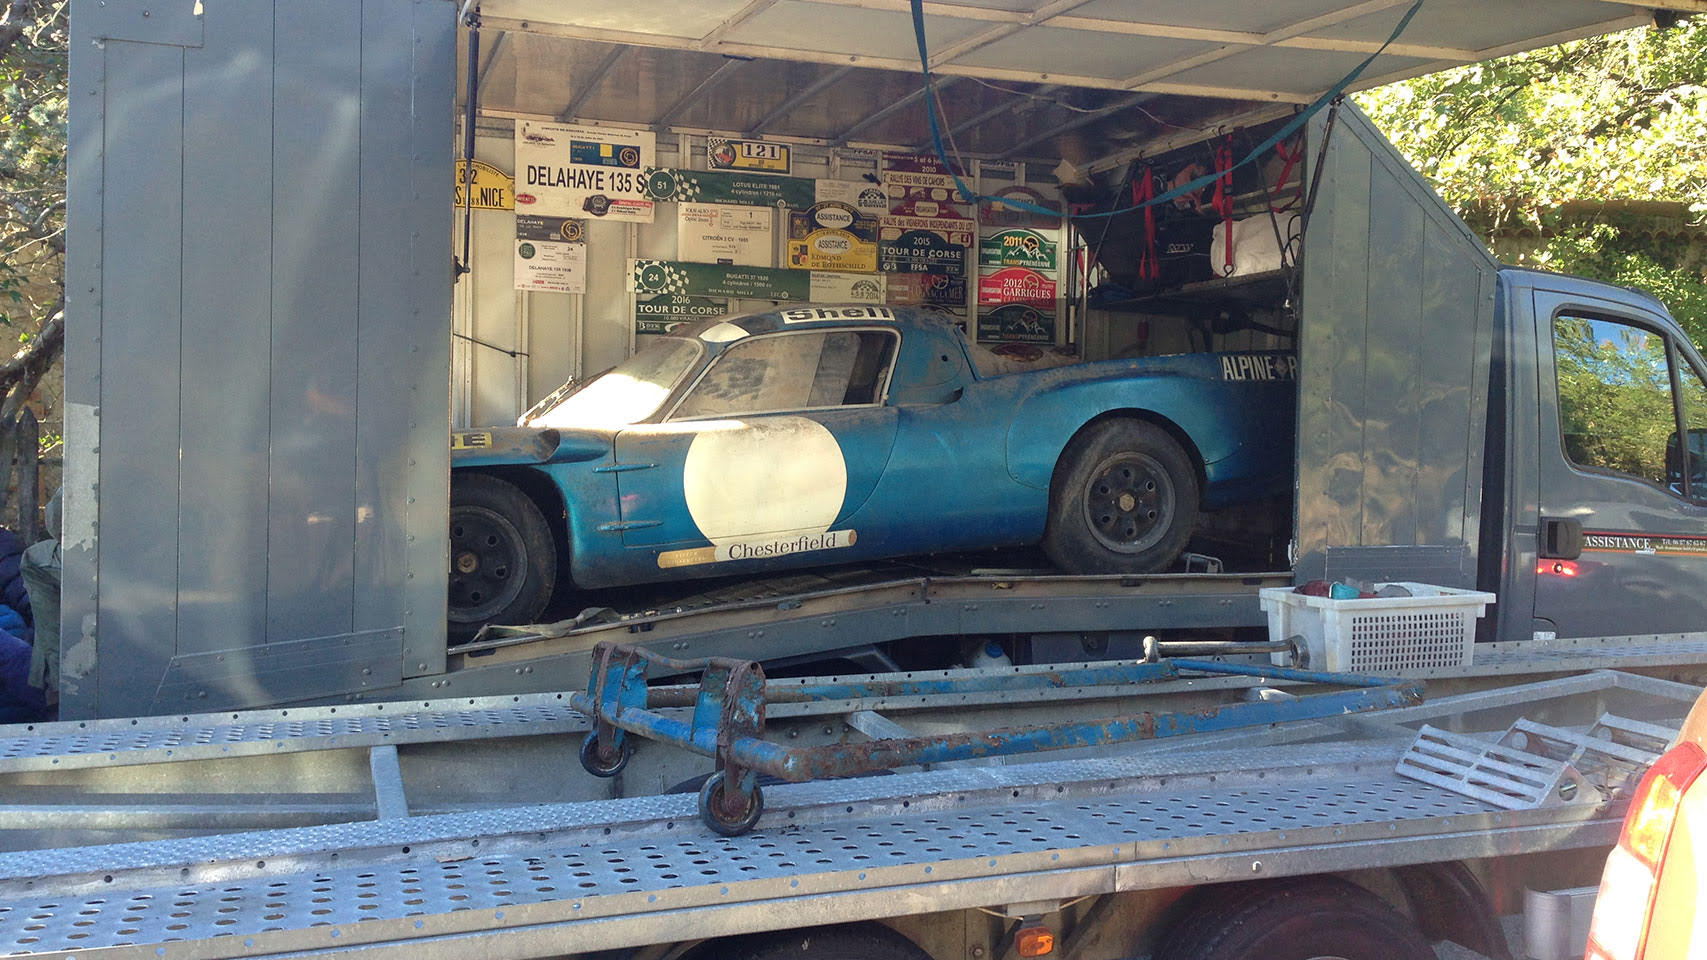 Alpine A210 Le Mans prototype in French shed